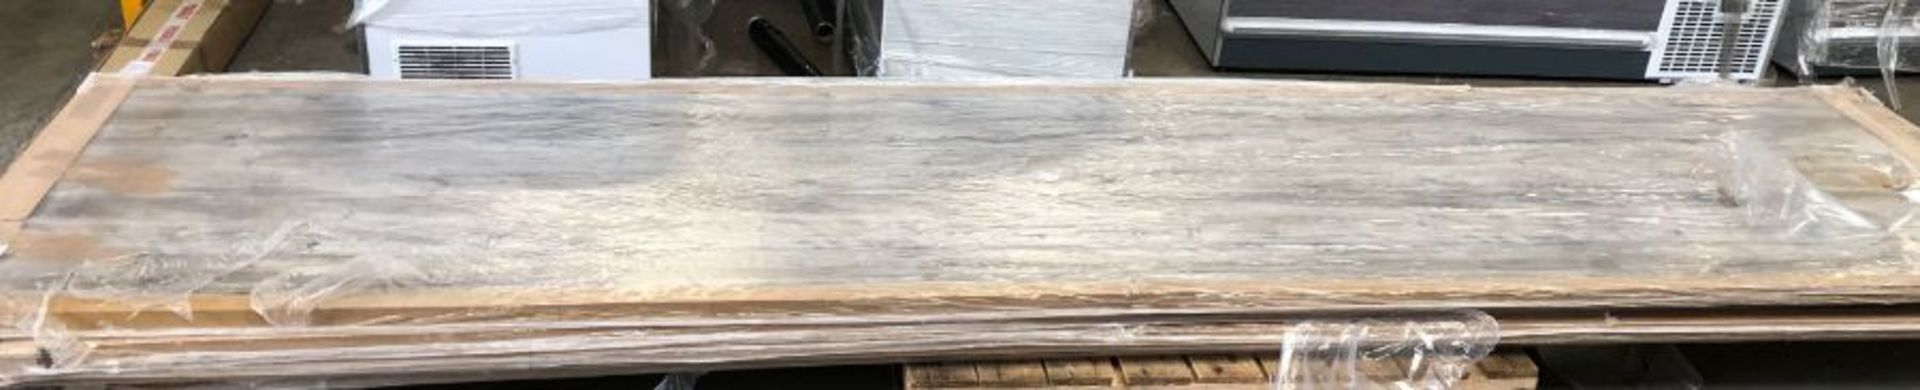 1 X 4M HIGH-END GERMAN KITCHEN WORKTOP, PONDEROSA PINE / SIZE: 4000mm X 900mm / RRP £620.00 / AS NEW - Image 2 of 2